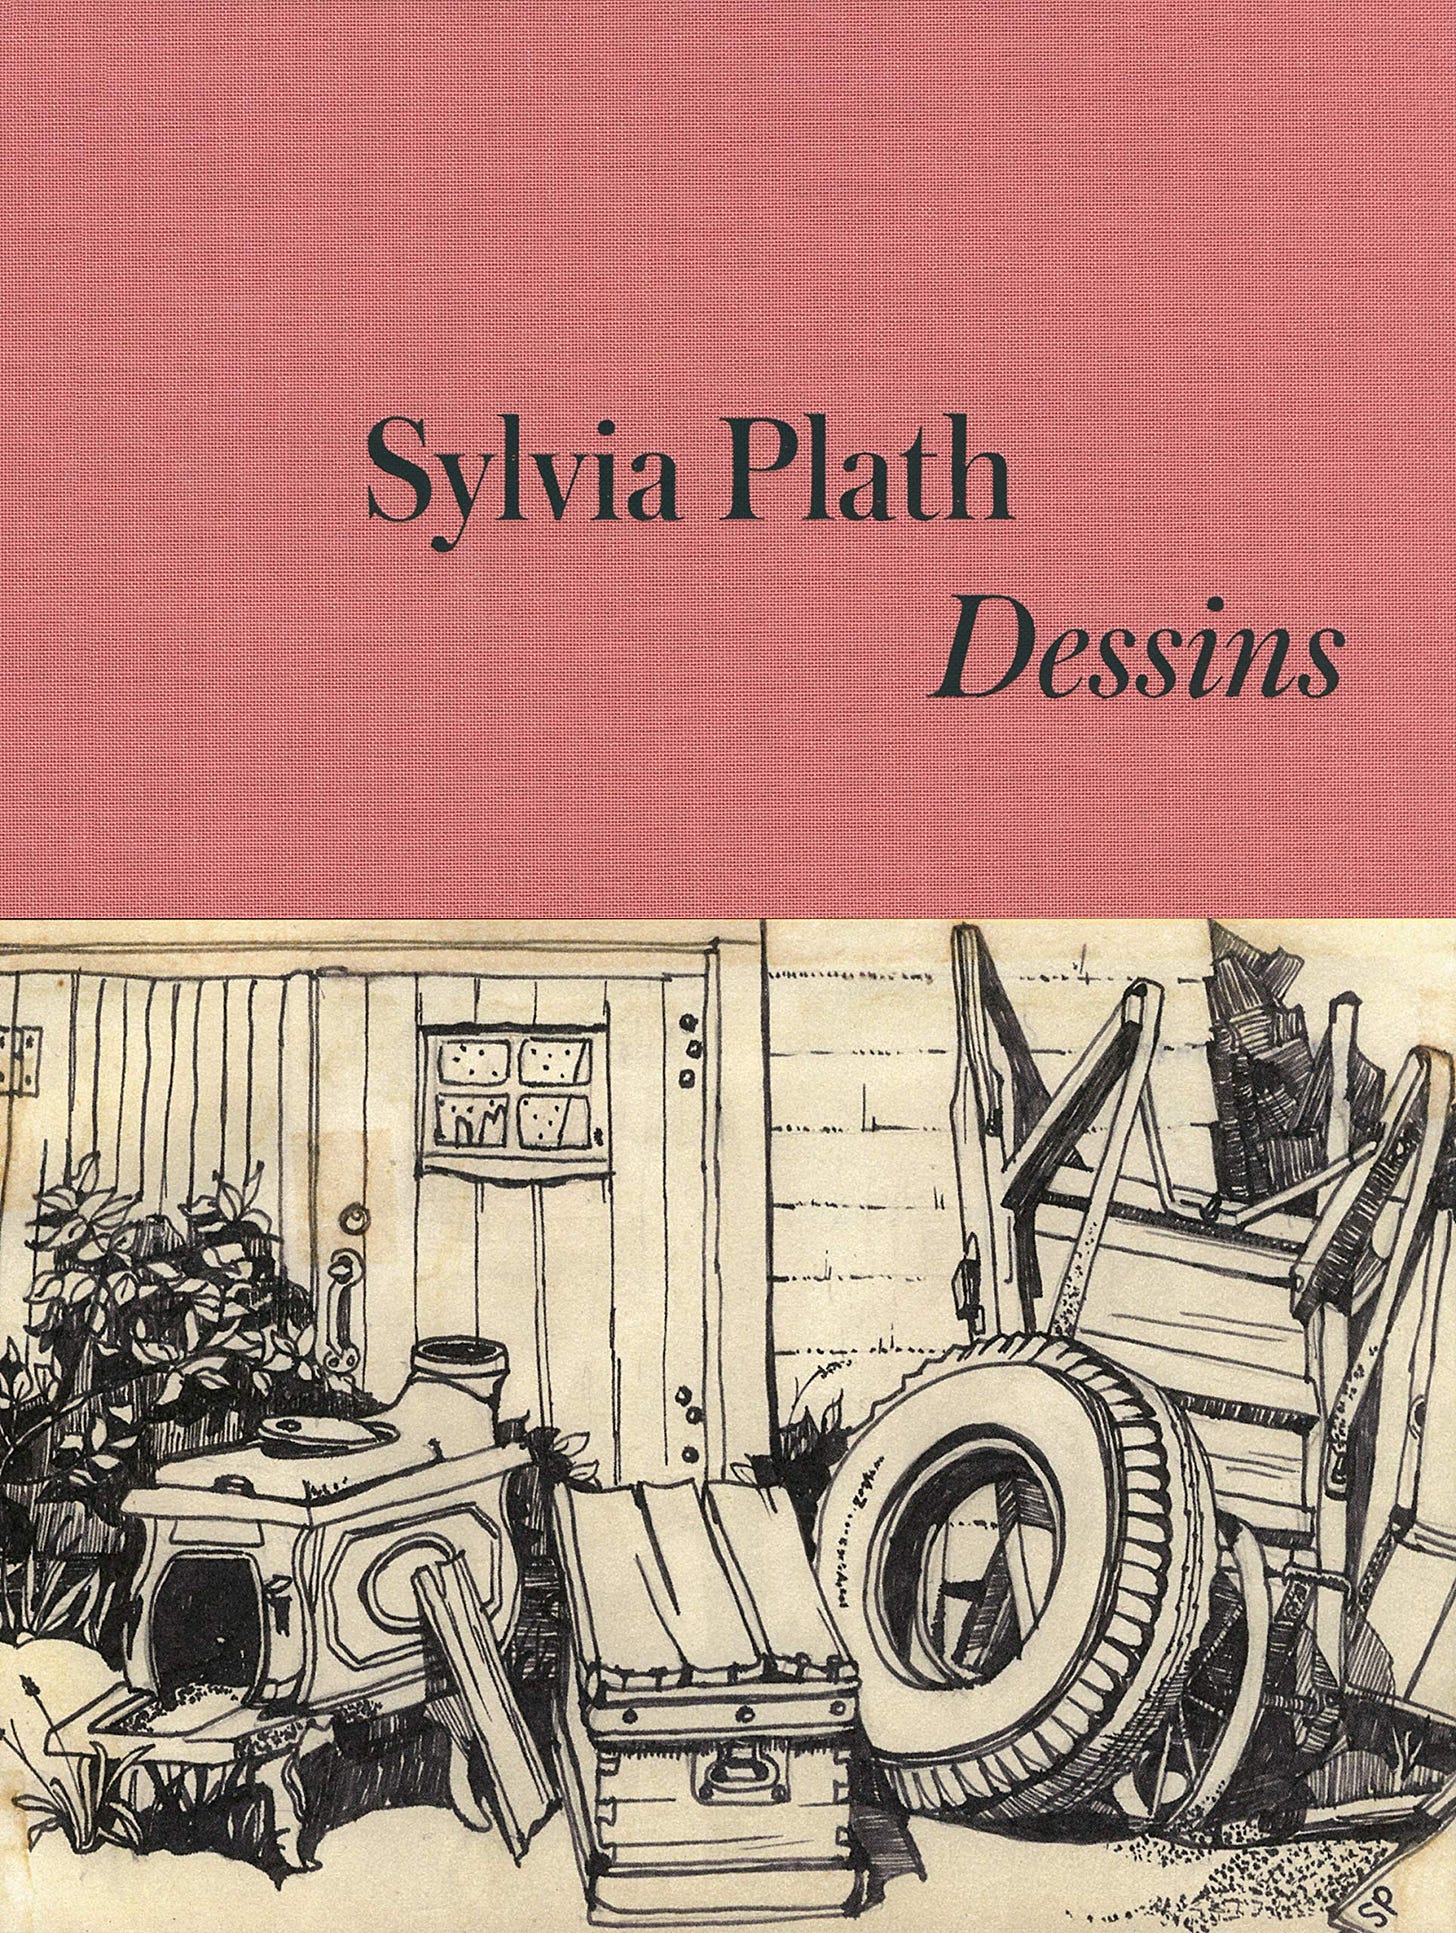 Faber to reissue Sylvia Plath: Drawings in September